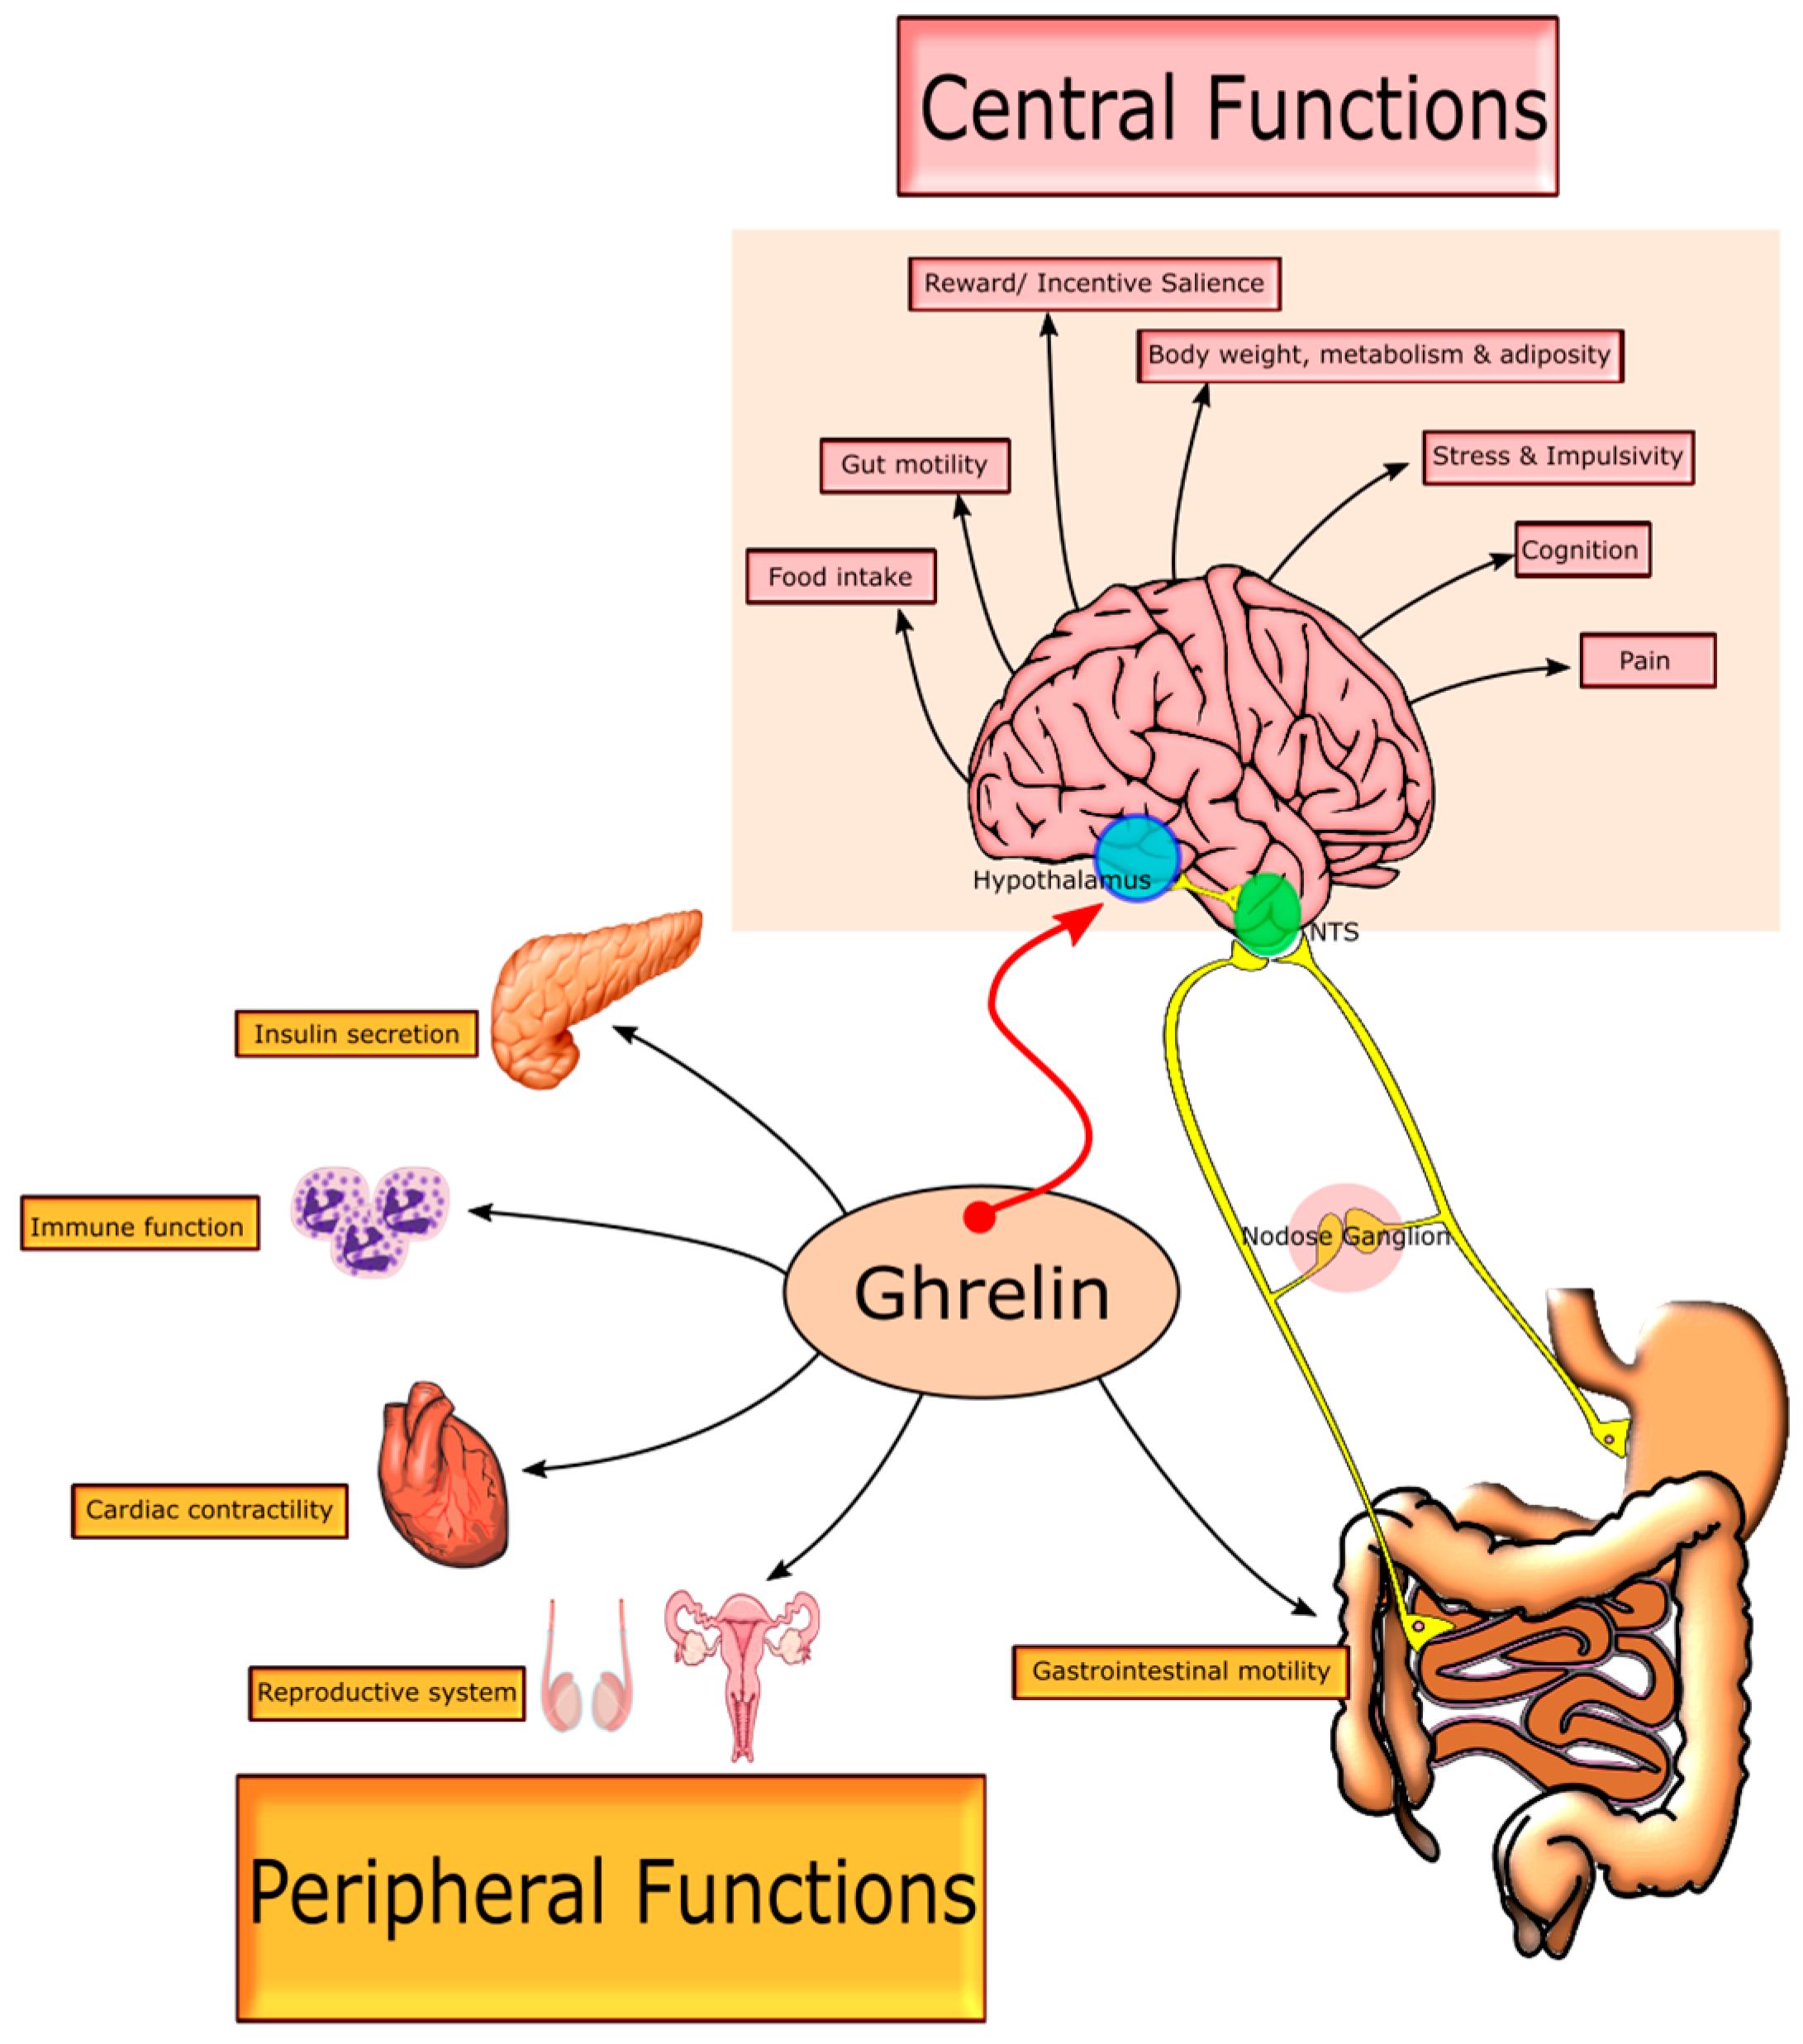 IJMS | Free Full-Text | From Belly to Brain: Targeting the Ghrelin Receptor  in Appetite and Food Intake Regulation